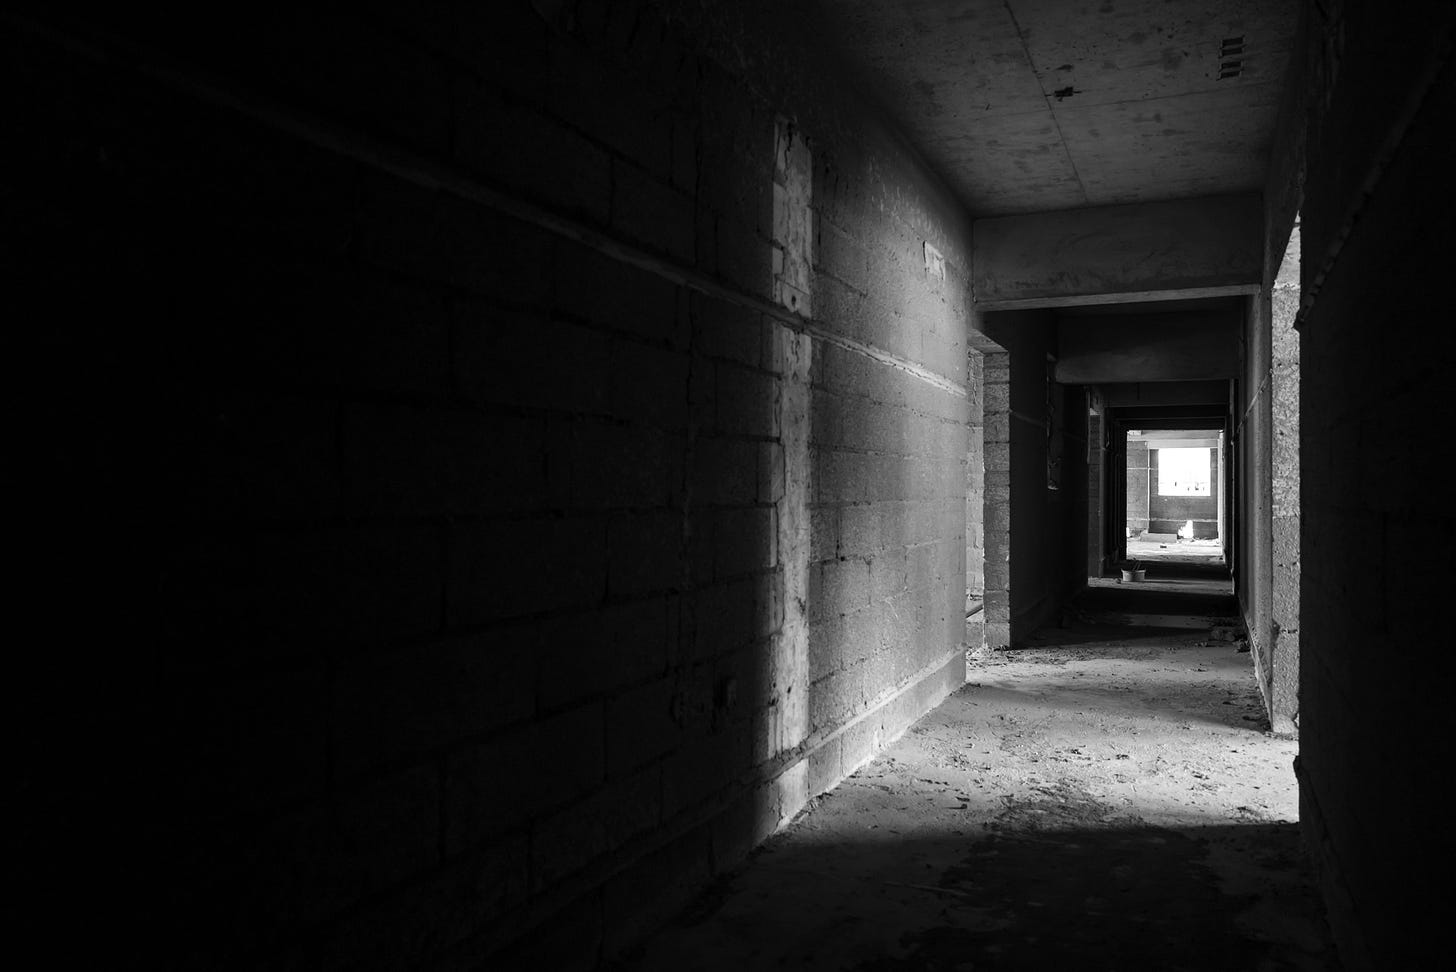 A black and white image of a hallway in an abandoned building. The walls are made of concrete blocks, and the floor surface is peeling. There are shadows and bands of light along the length of the hallway.